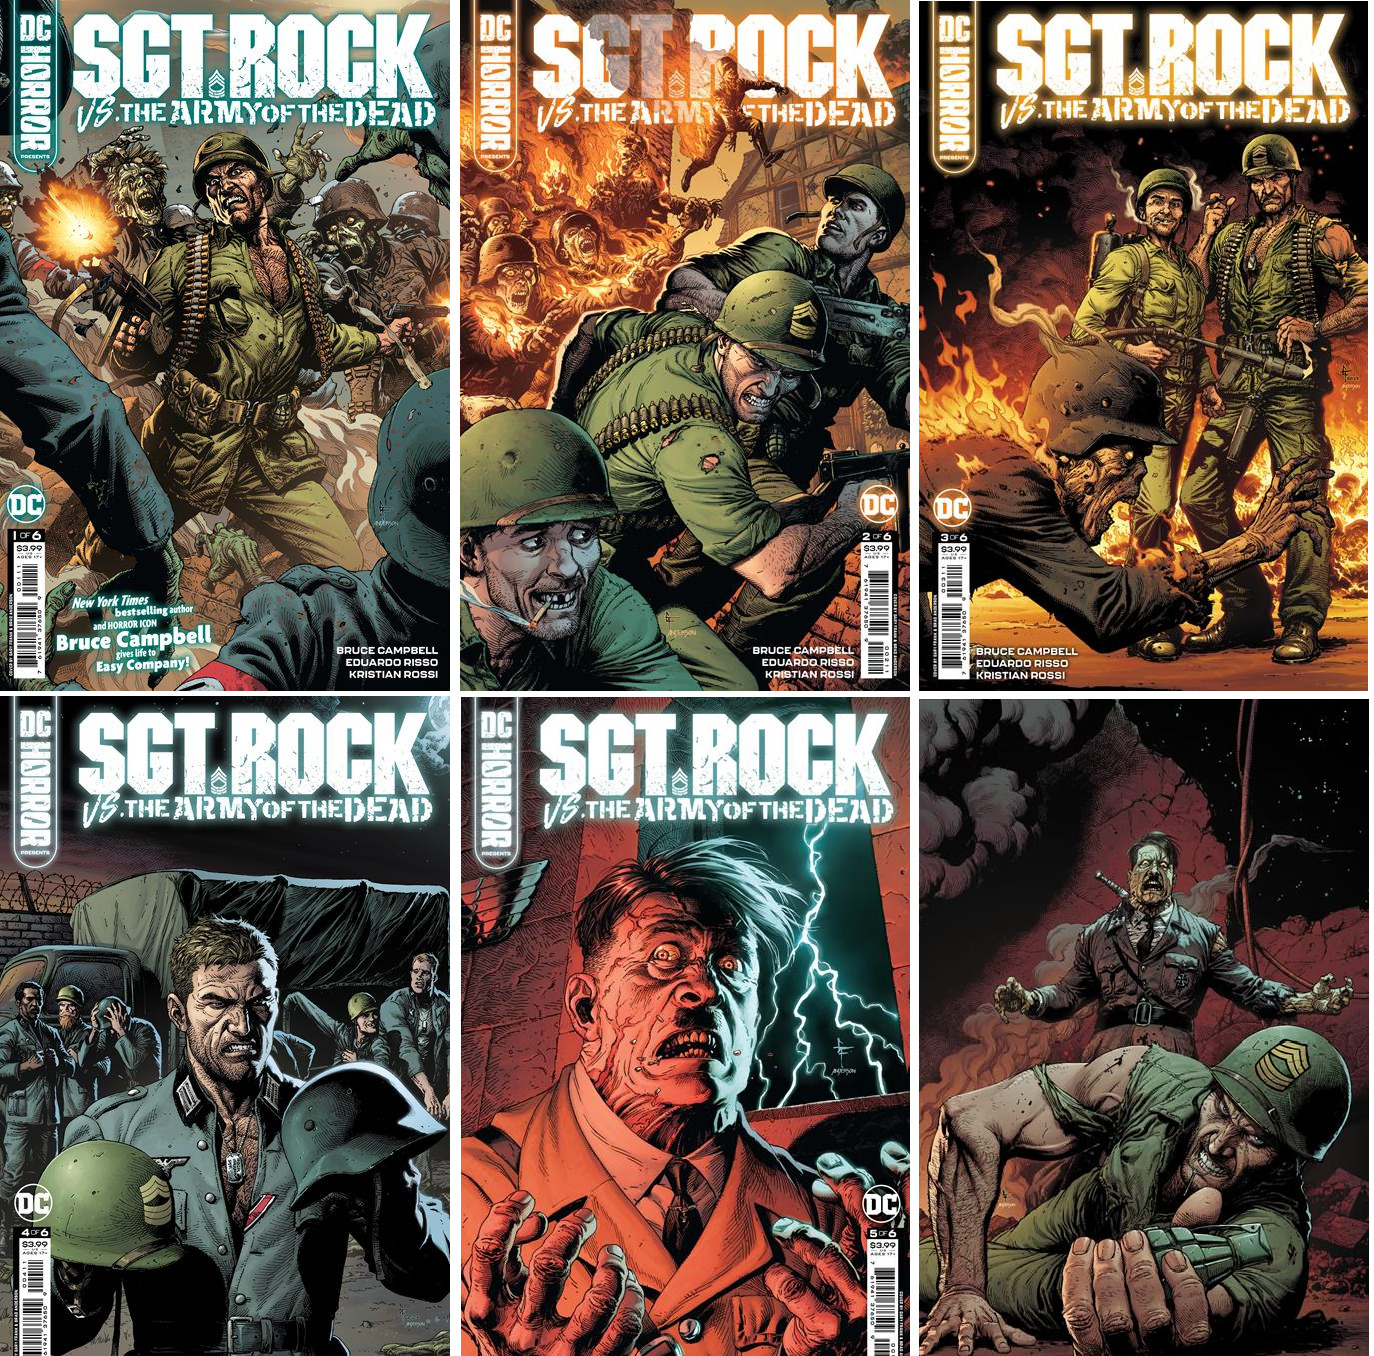 DC HORROR PRESENTS SGT ROCK VS THE ARMY OF THE DEAD #1-6 COMPLETE COVER A SET